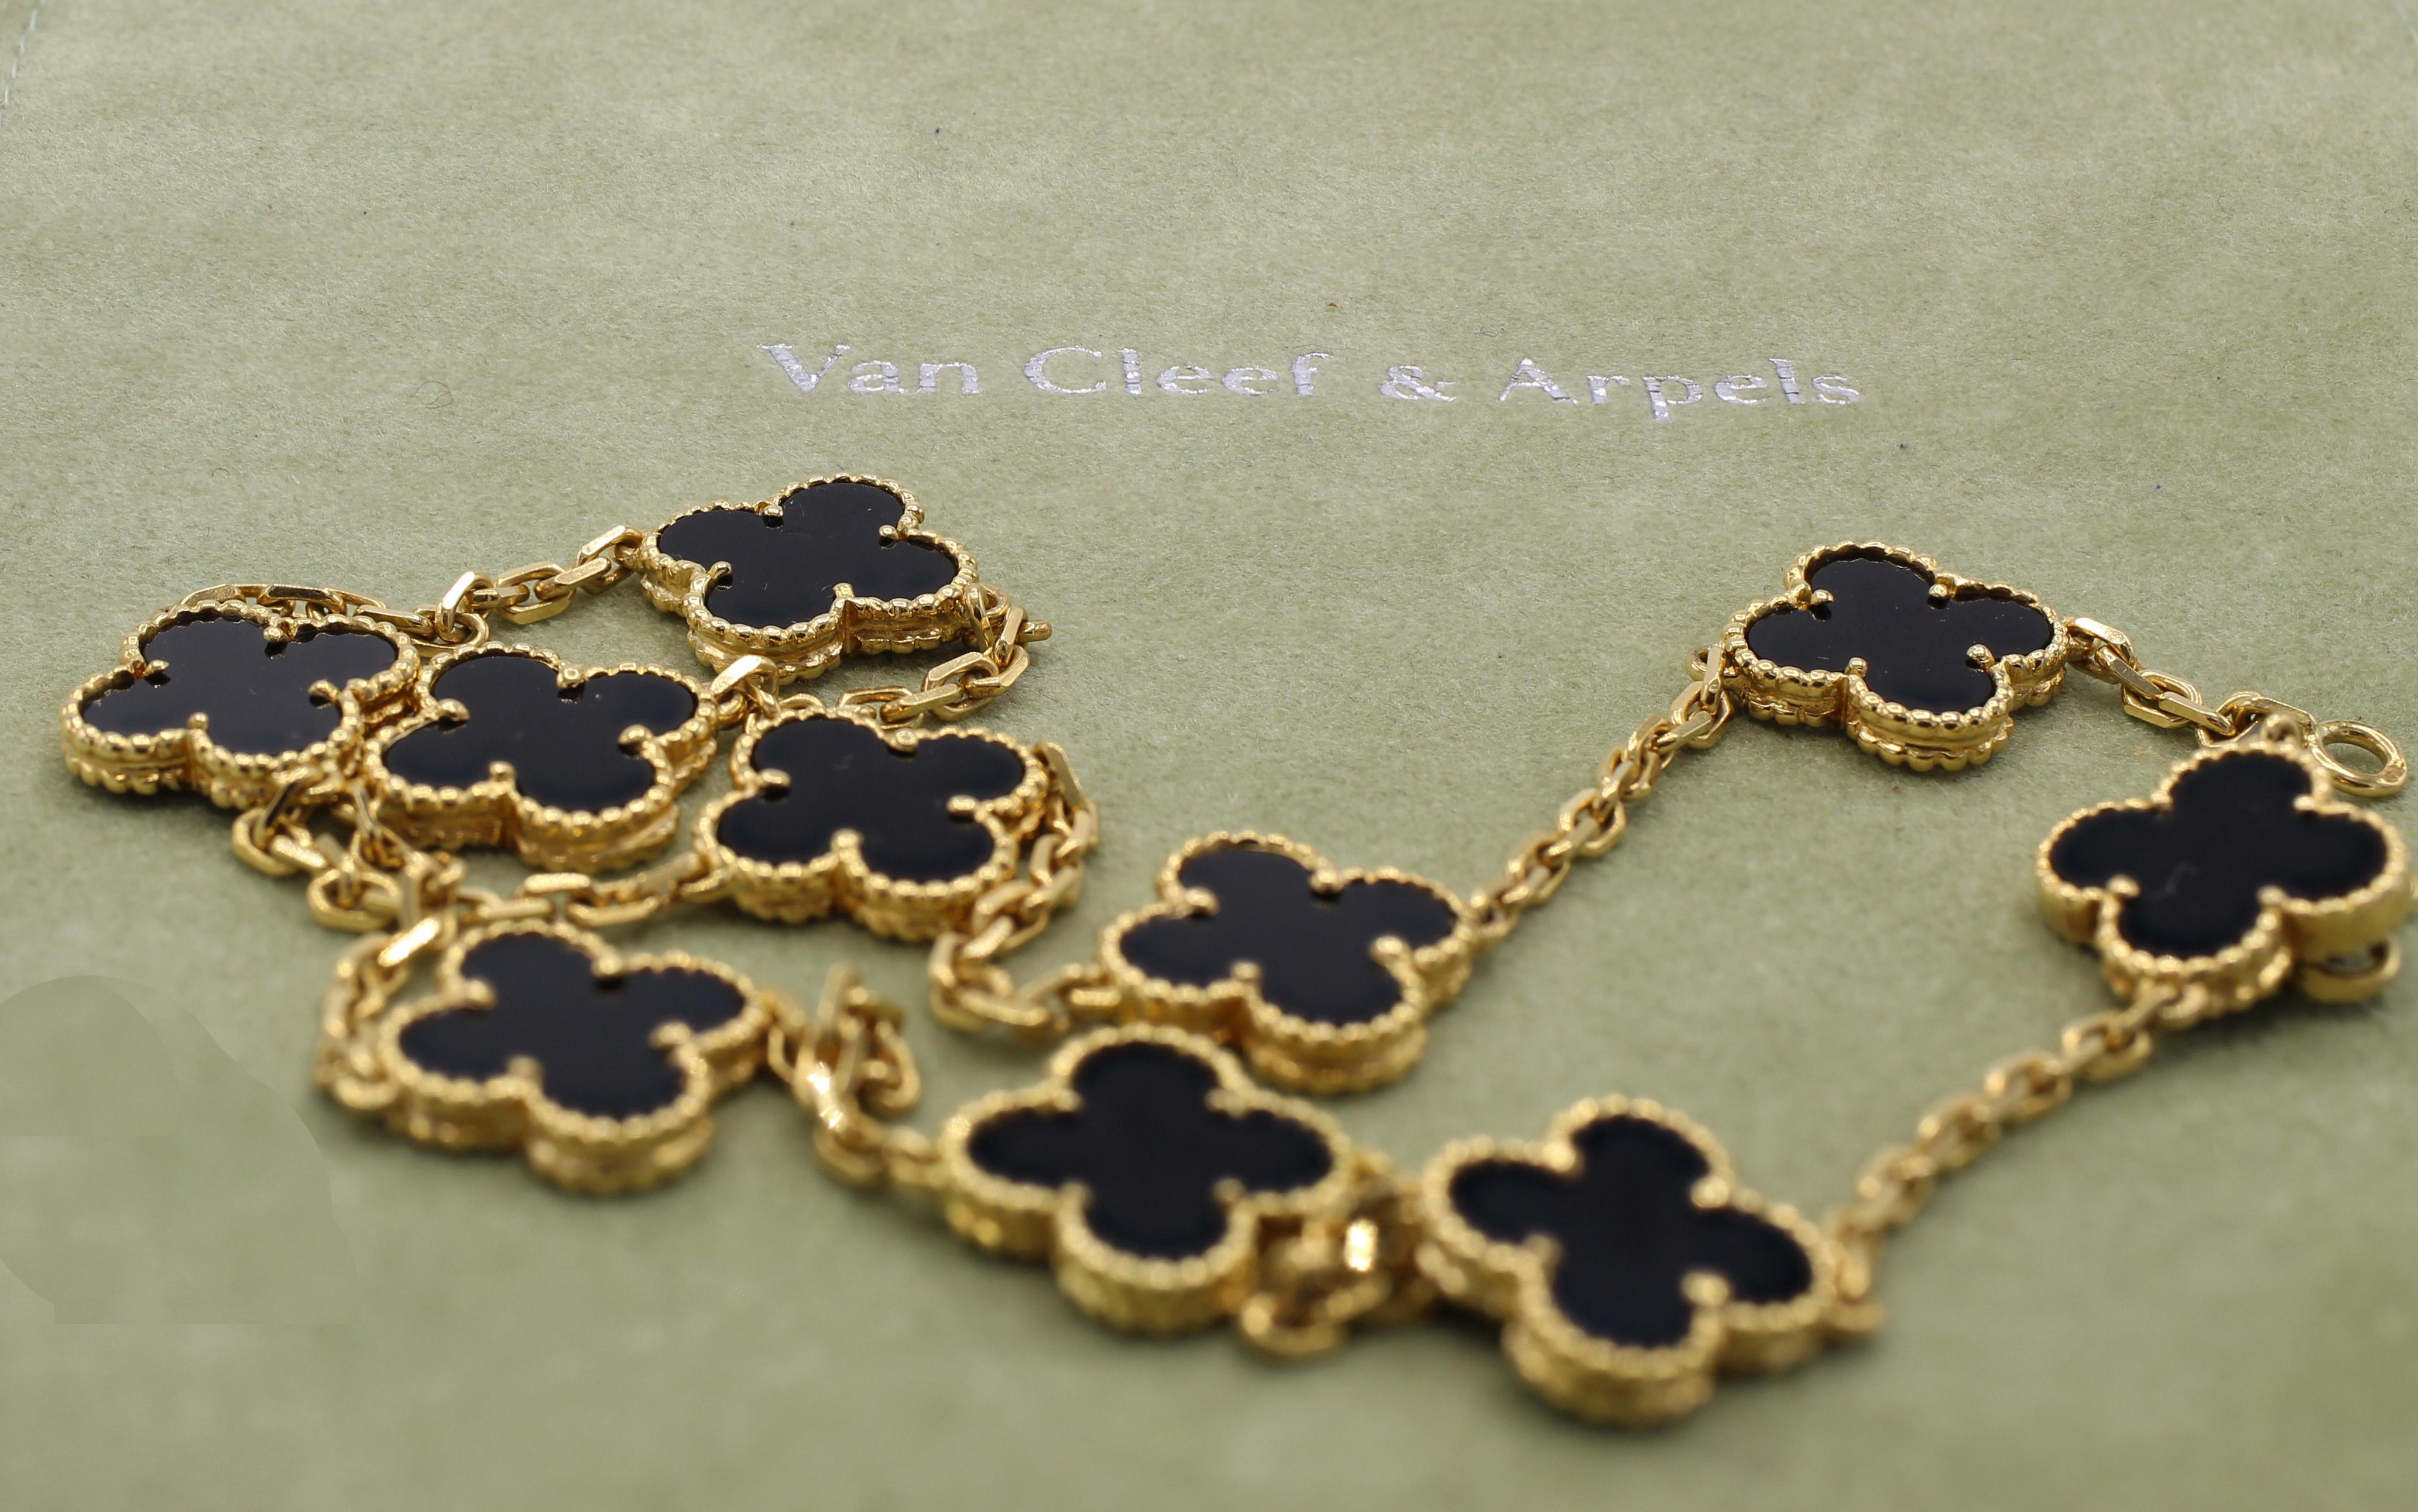 10 clover leaf 18 karat yellow gold elements set with onyx. Signed VCA 750. Numbered . French assay mark. Original VCA pouch